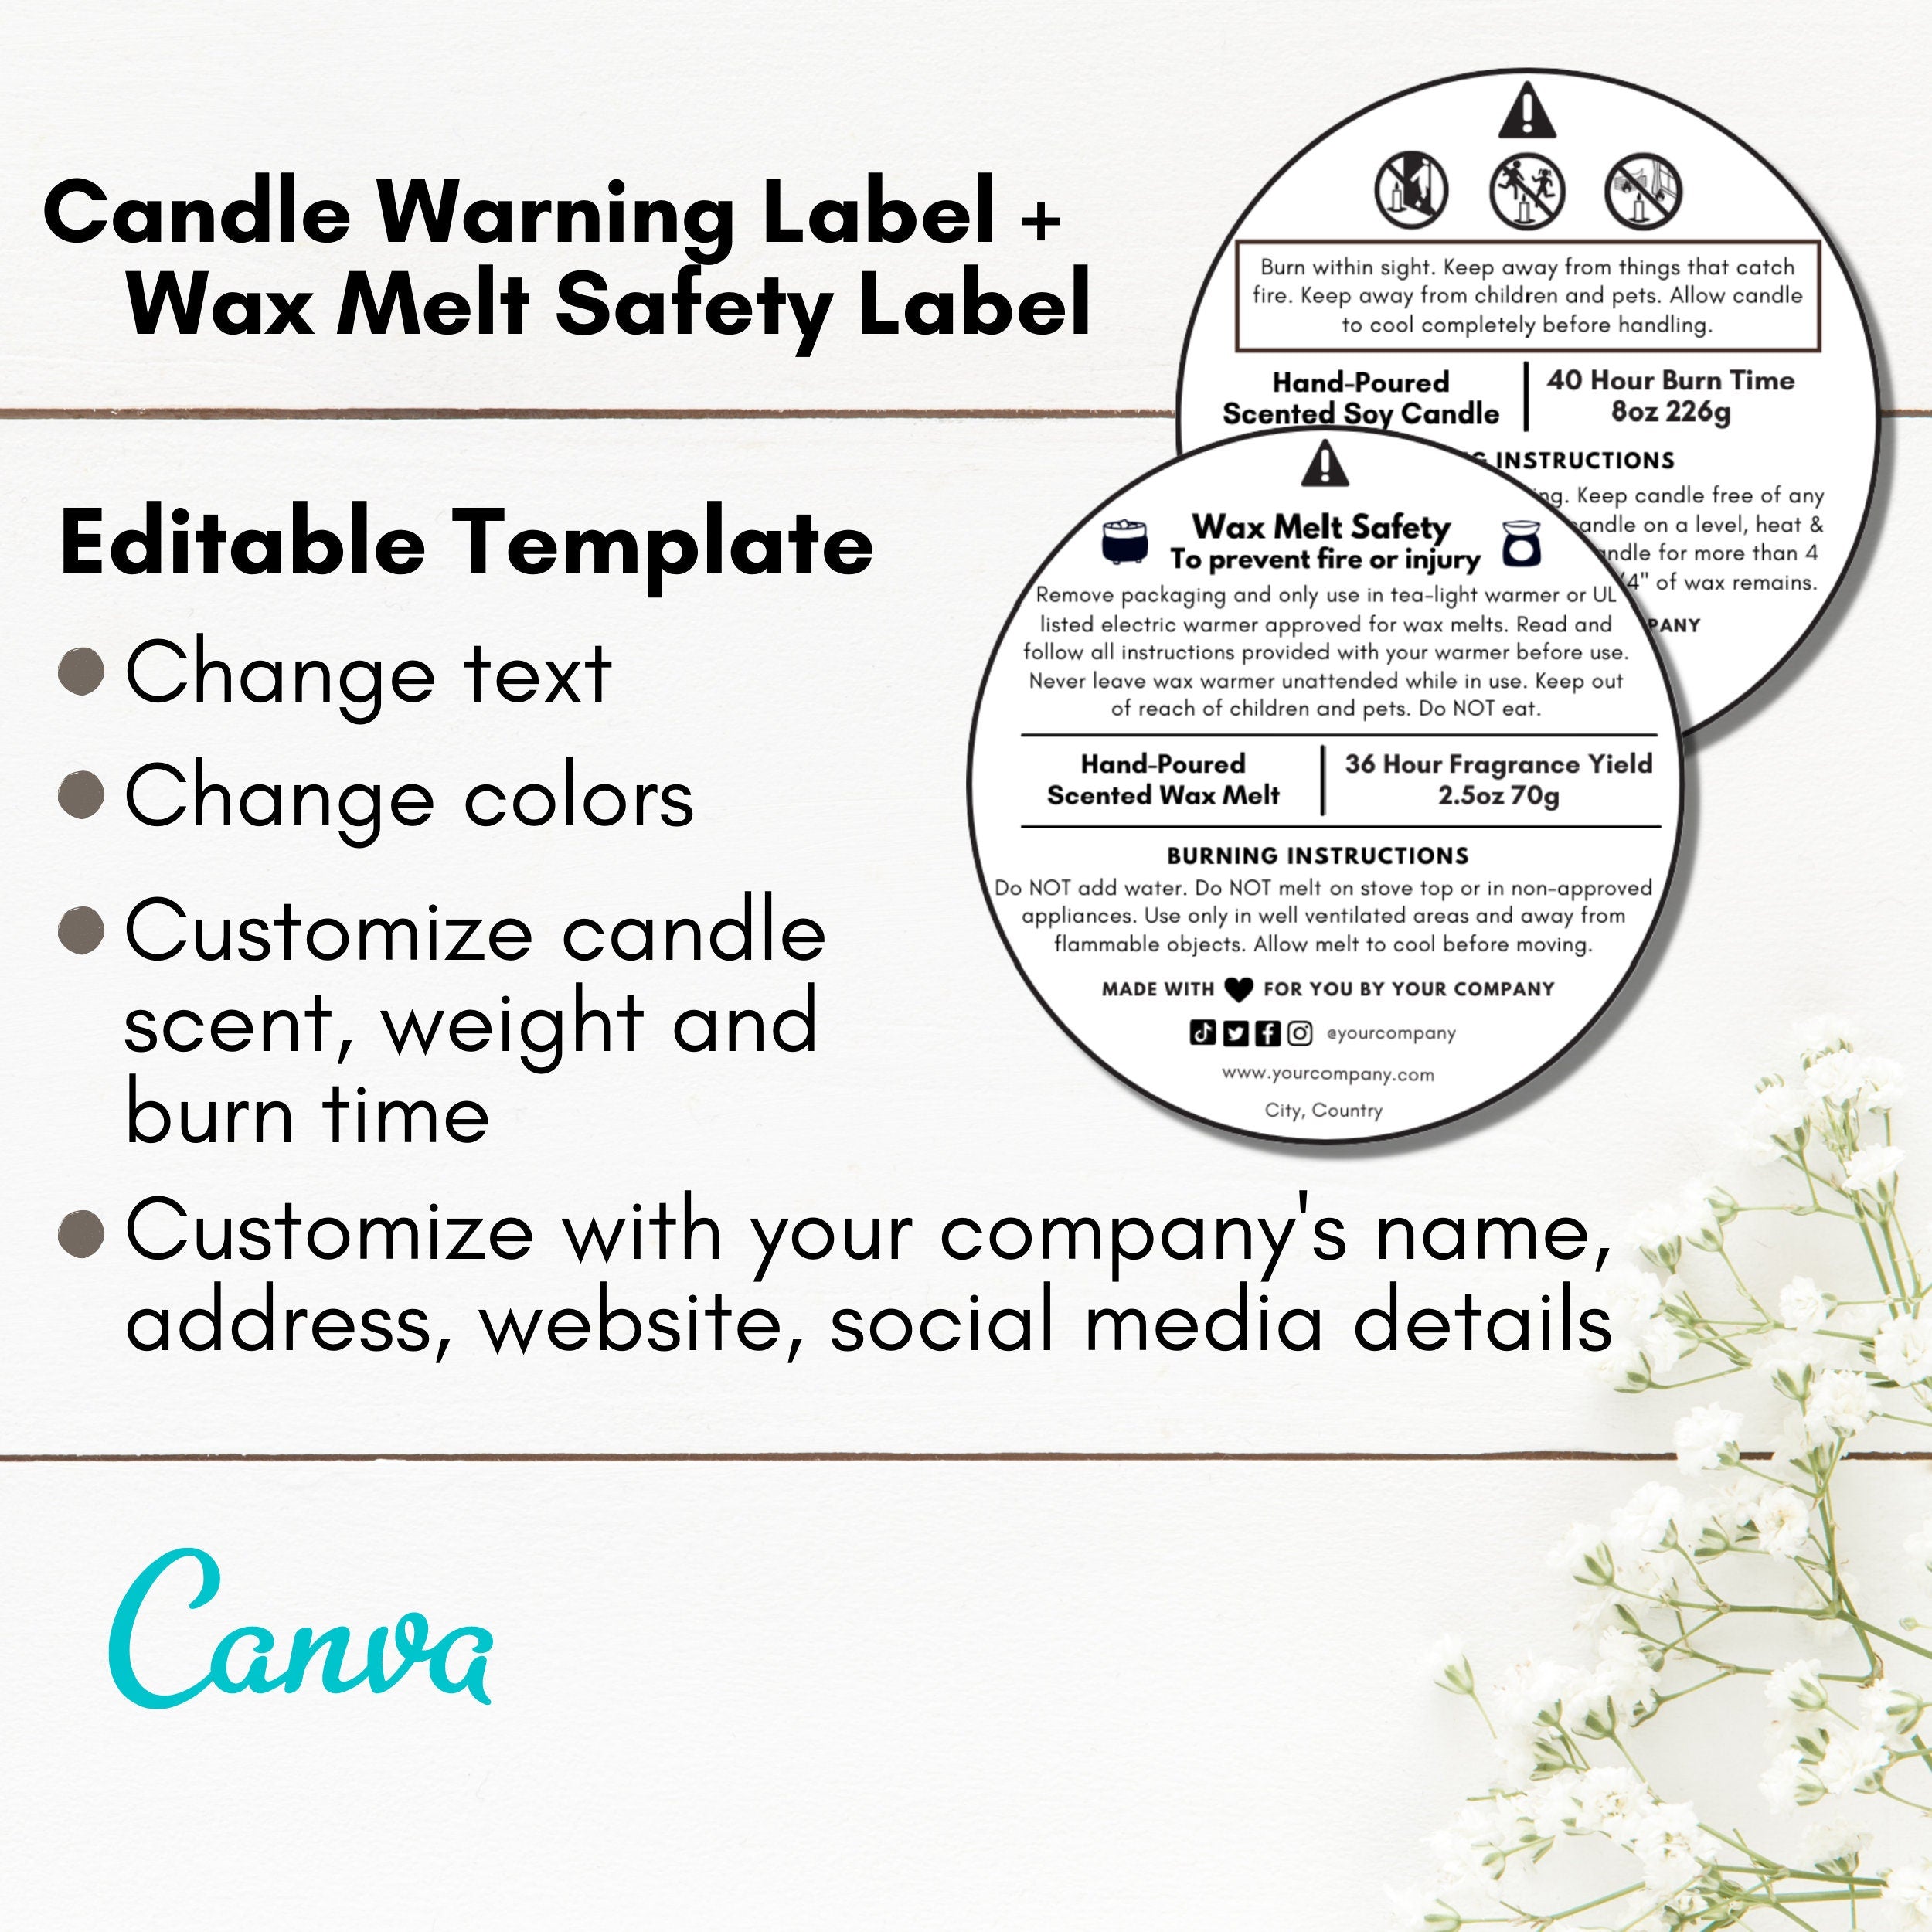 Candle Warning Label Template: Printable Candle Safety Stickers